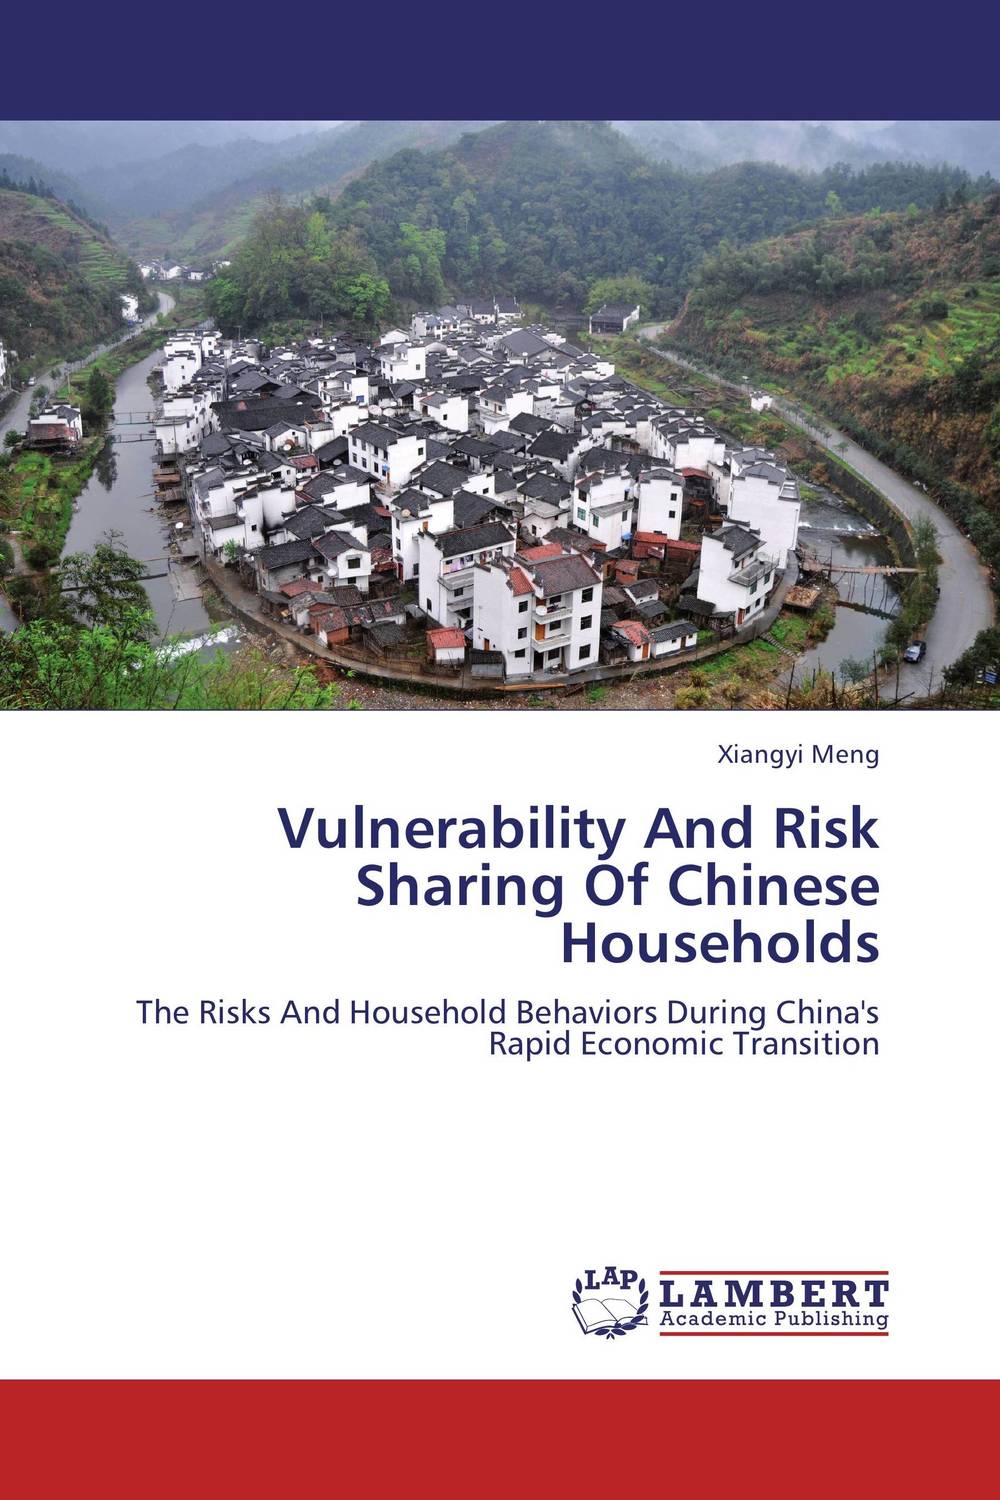 Vulnerability And Risk Sharing Of Chinese Households